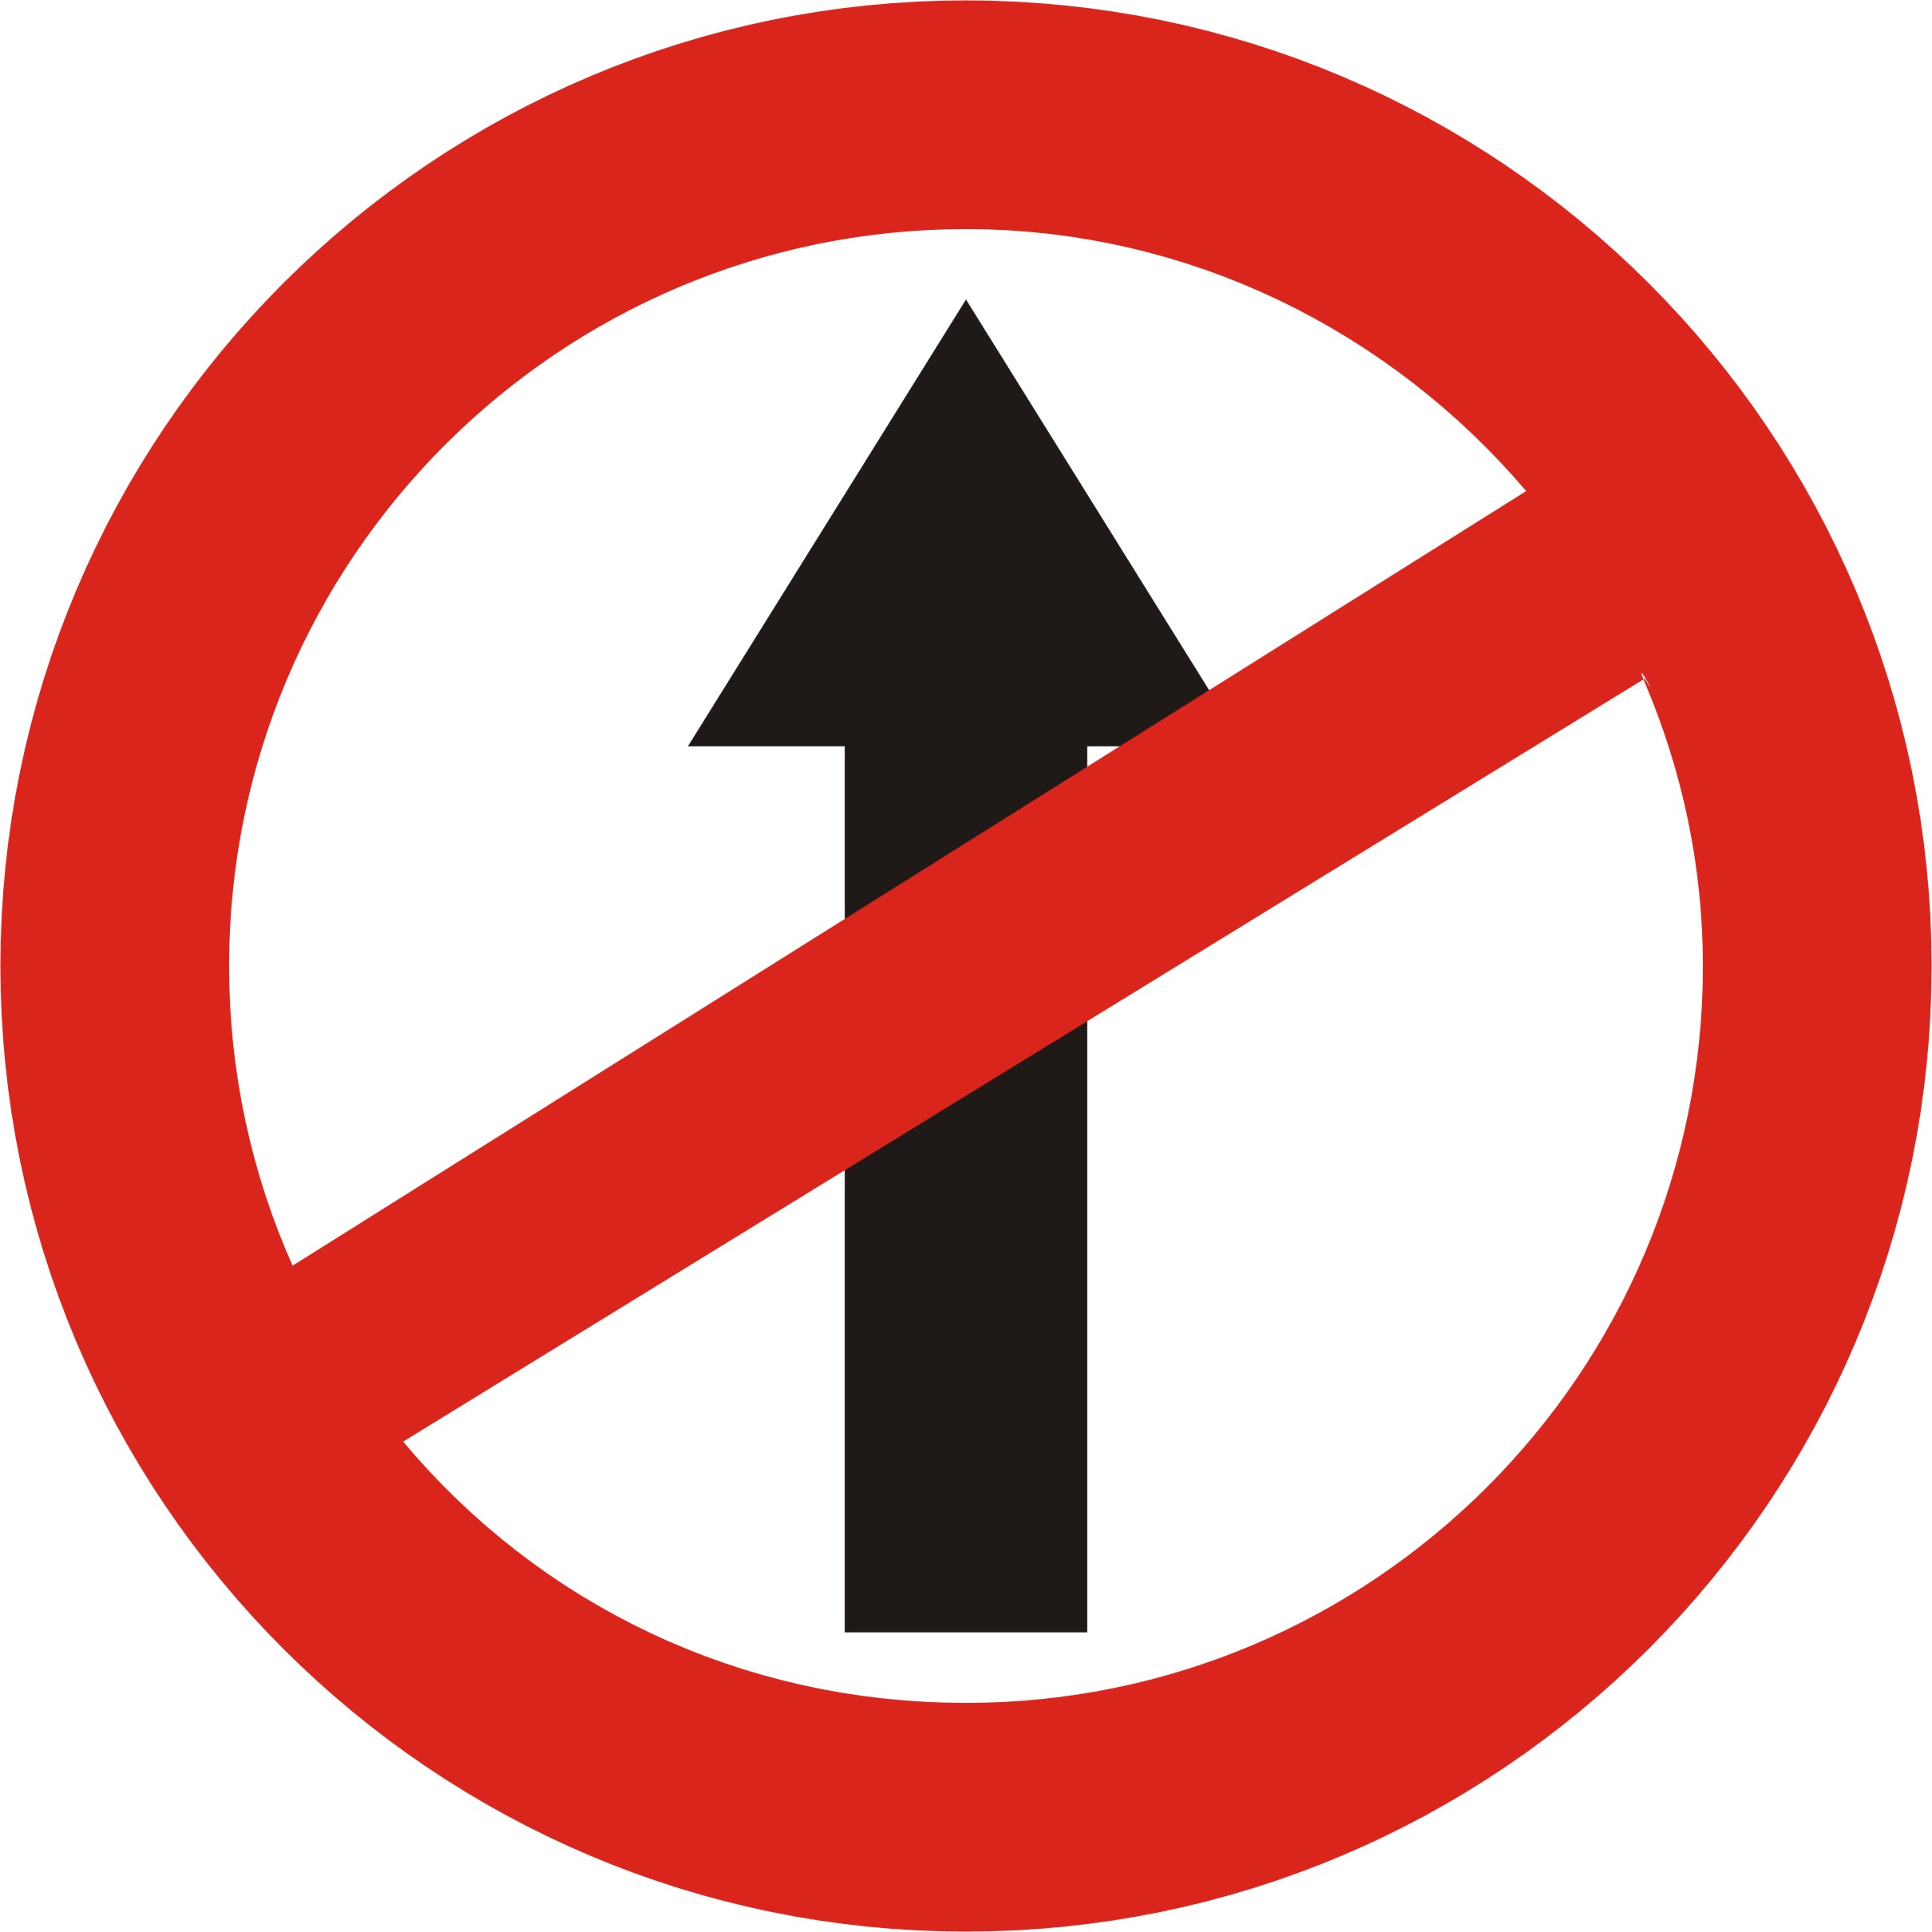 Road Sign No Entry.jpg - ClipArt Best - ClipArt Best